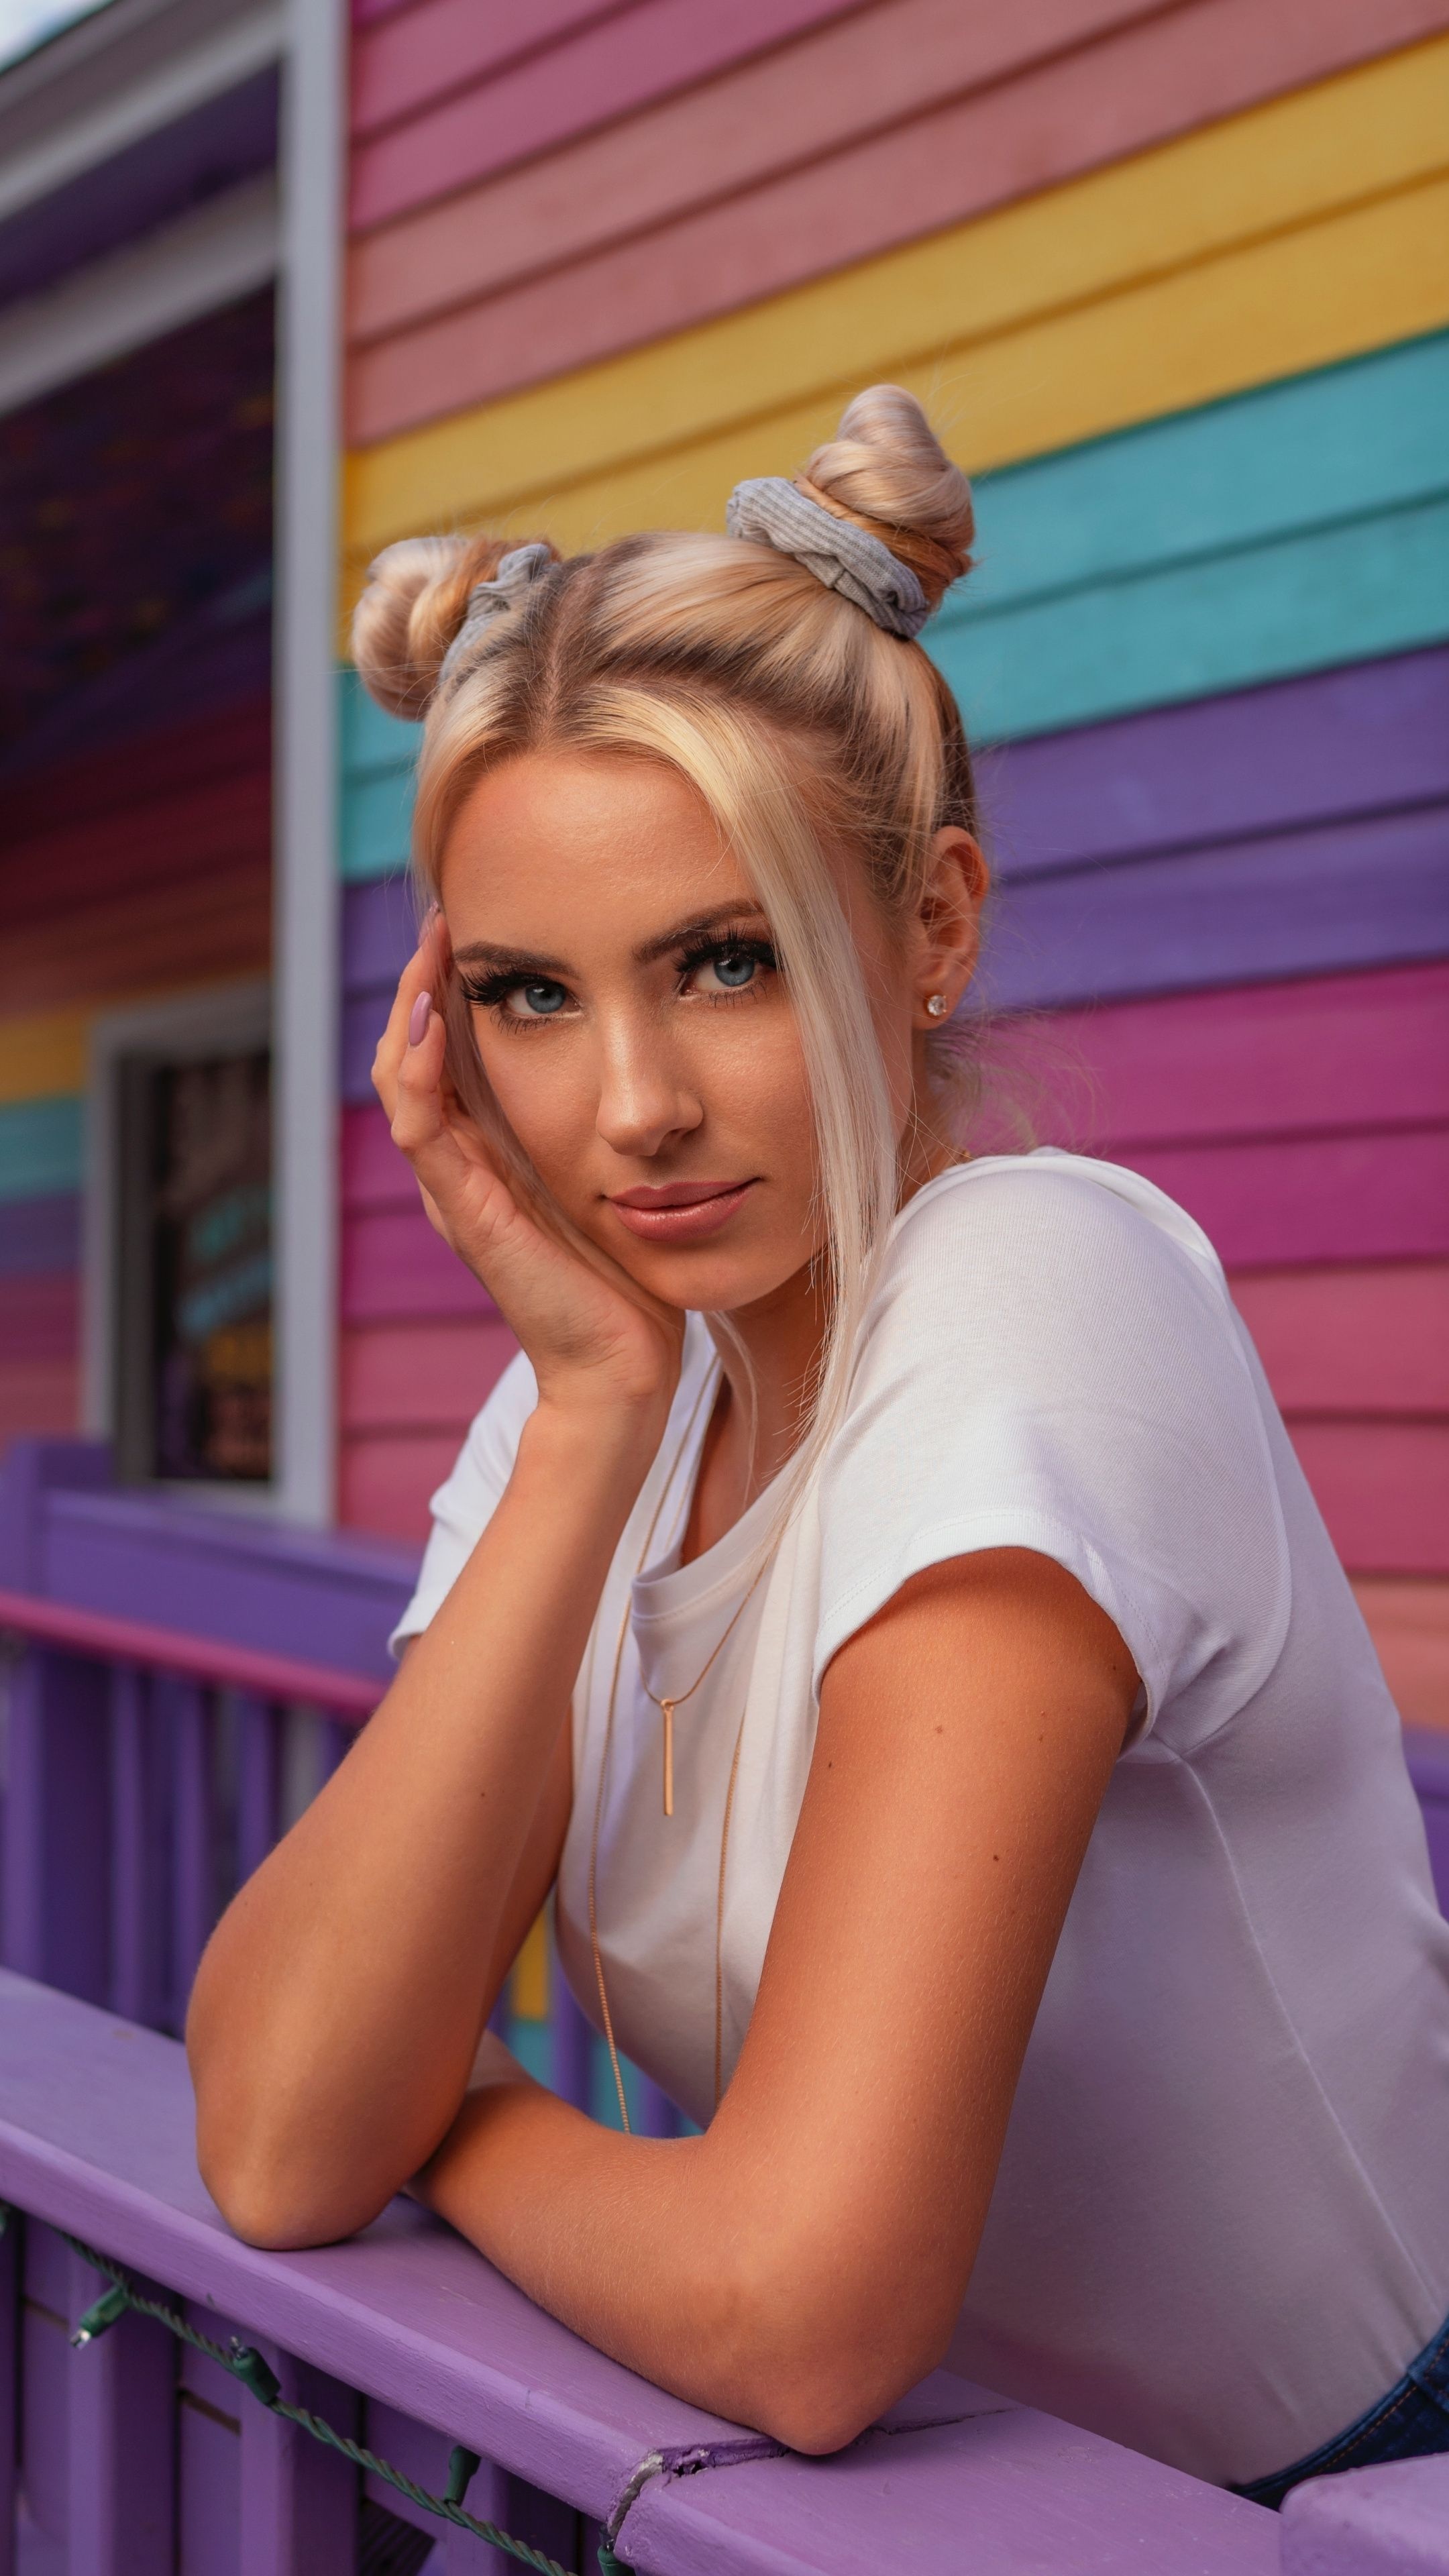 Most Beautiful Women: Alex Siracusano, Blonde girl, Posing for pictures, Lean forward. 2160x3840 4K Background.